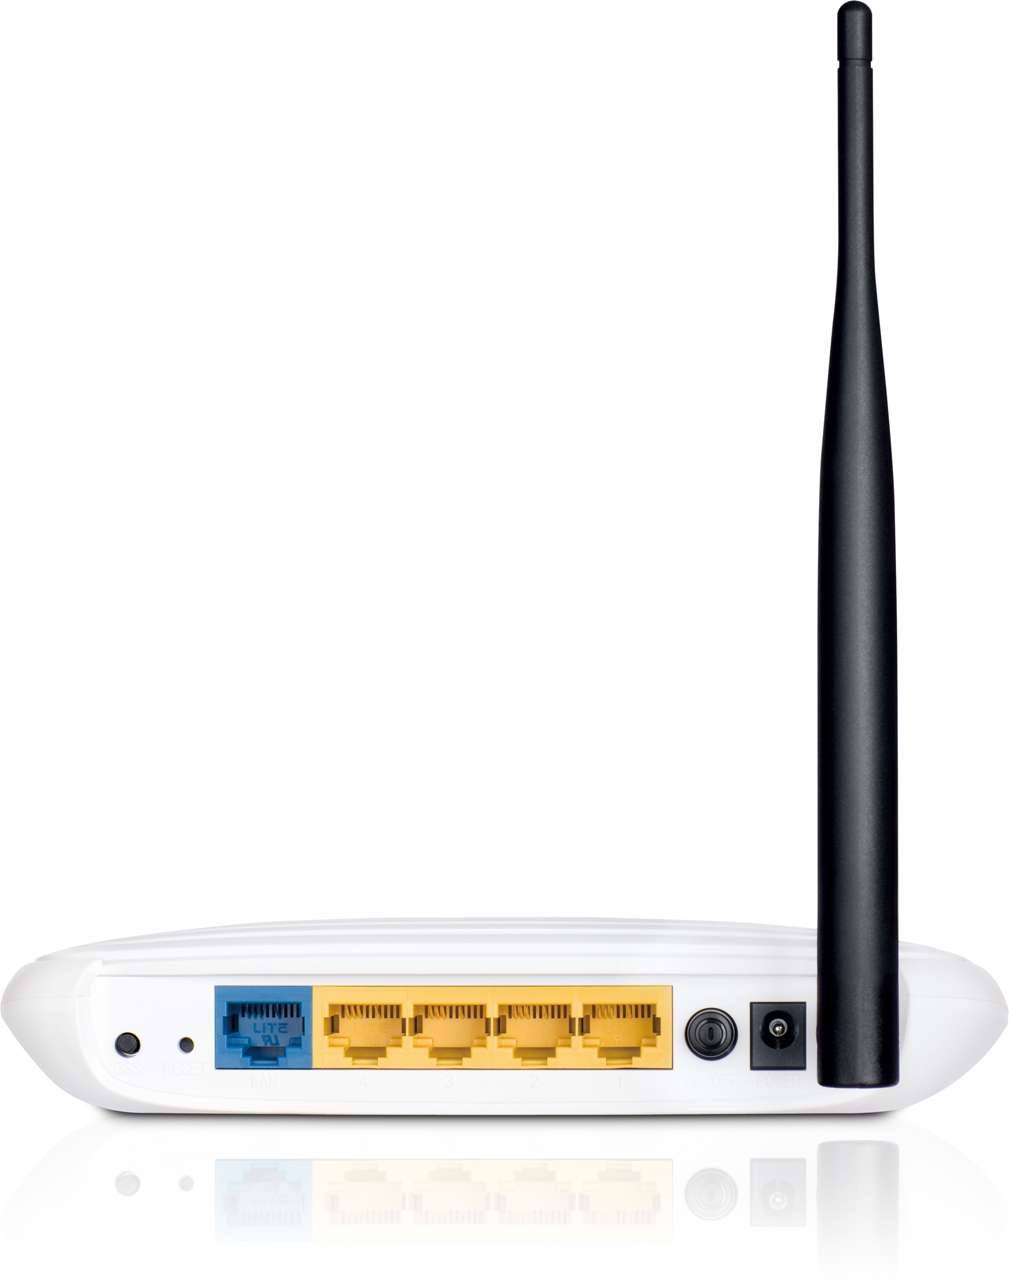 Roteador Wireless TP-Link TL-WR740N - 150Mbps - an